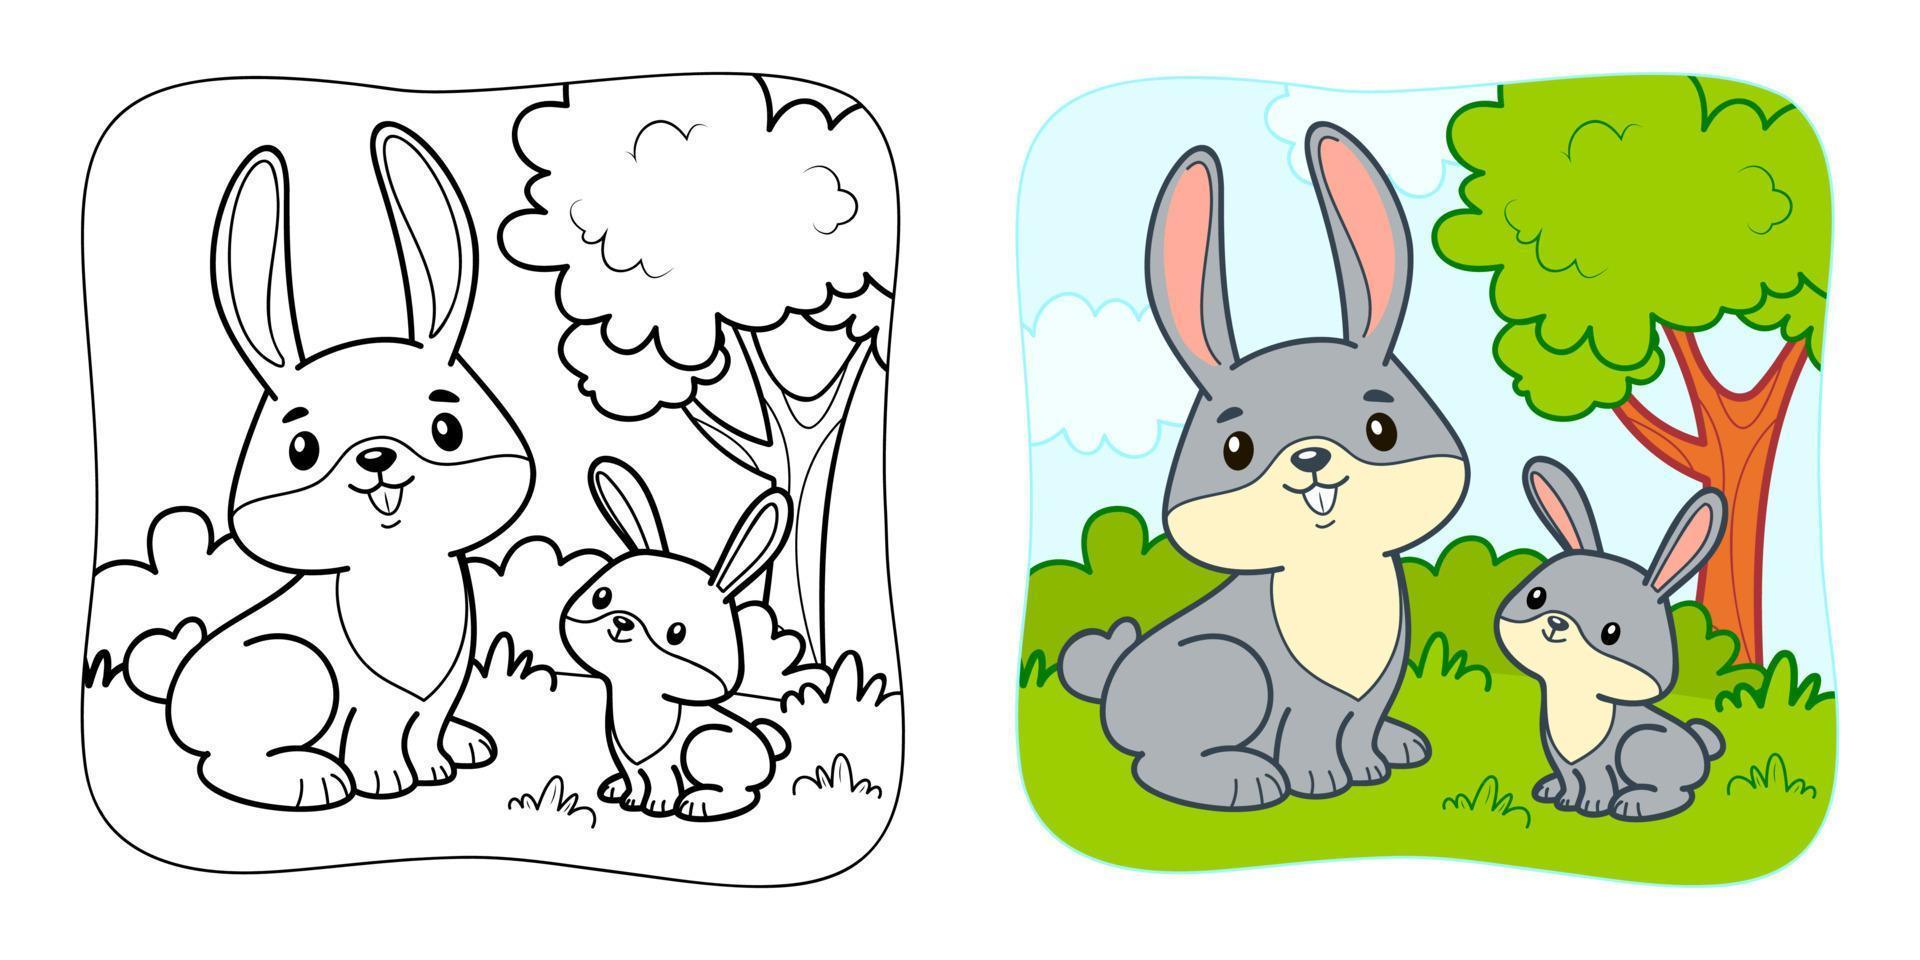 Coloring book or Coloring page for kids. Rabbit vector illustration clipart. Nature background.